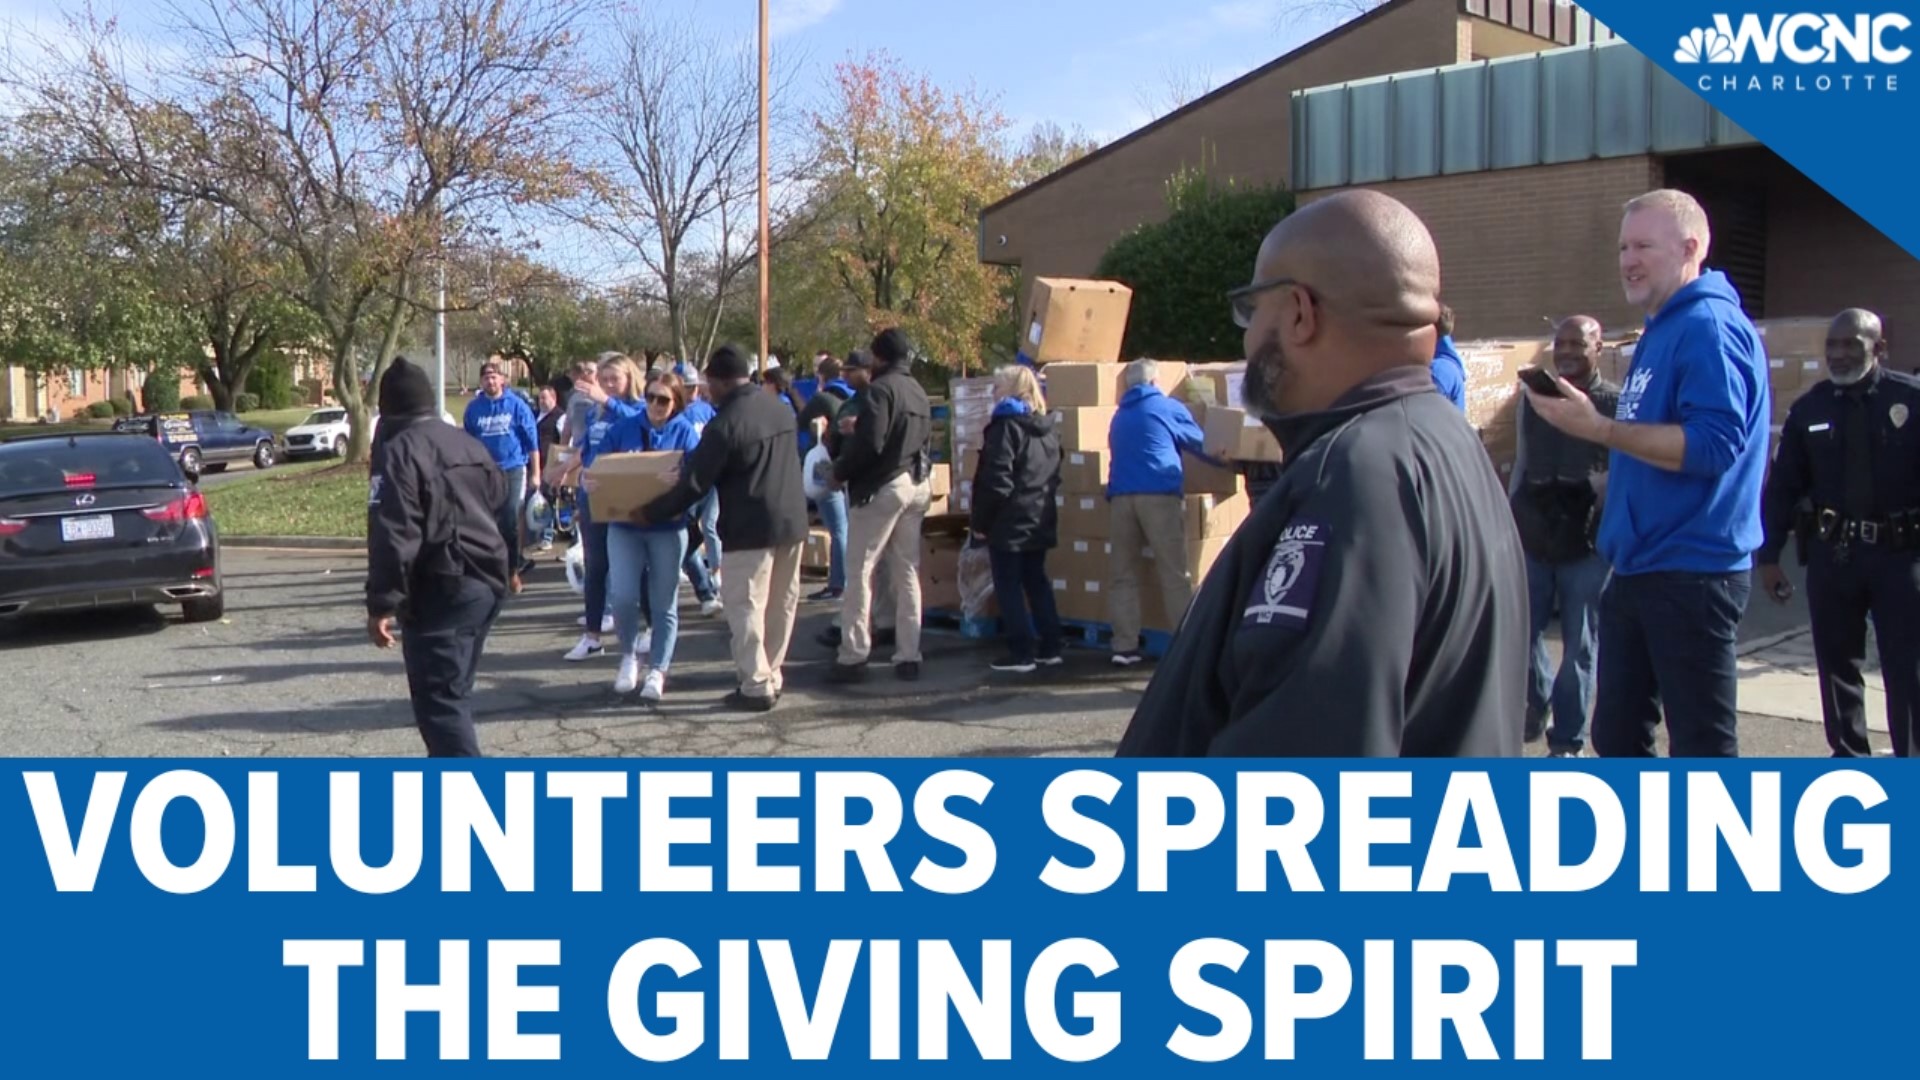 Volunteers handed out turkeys, stuffing, sides, and all the fixings to folks who need them.